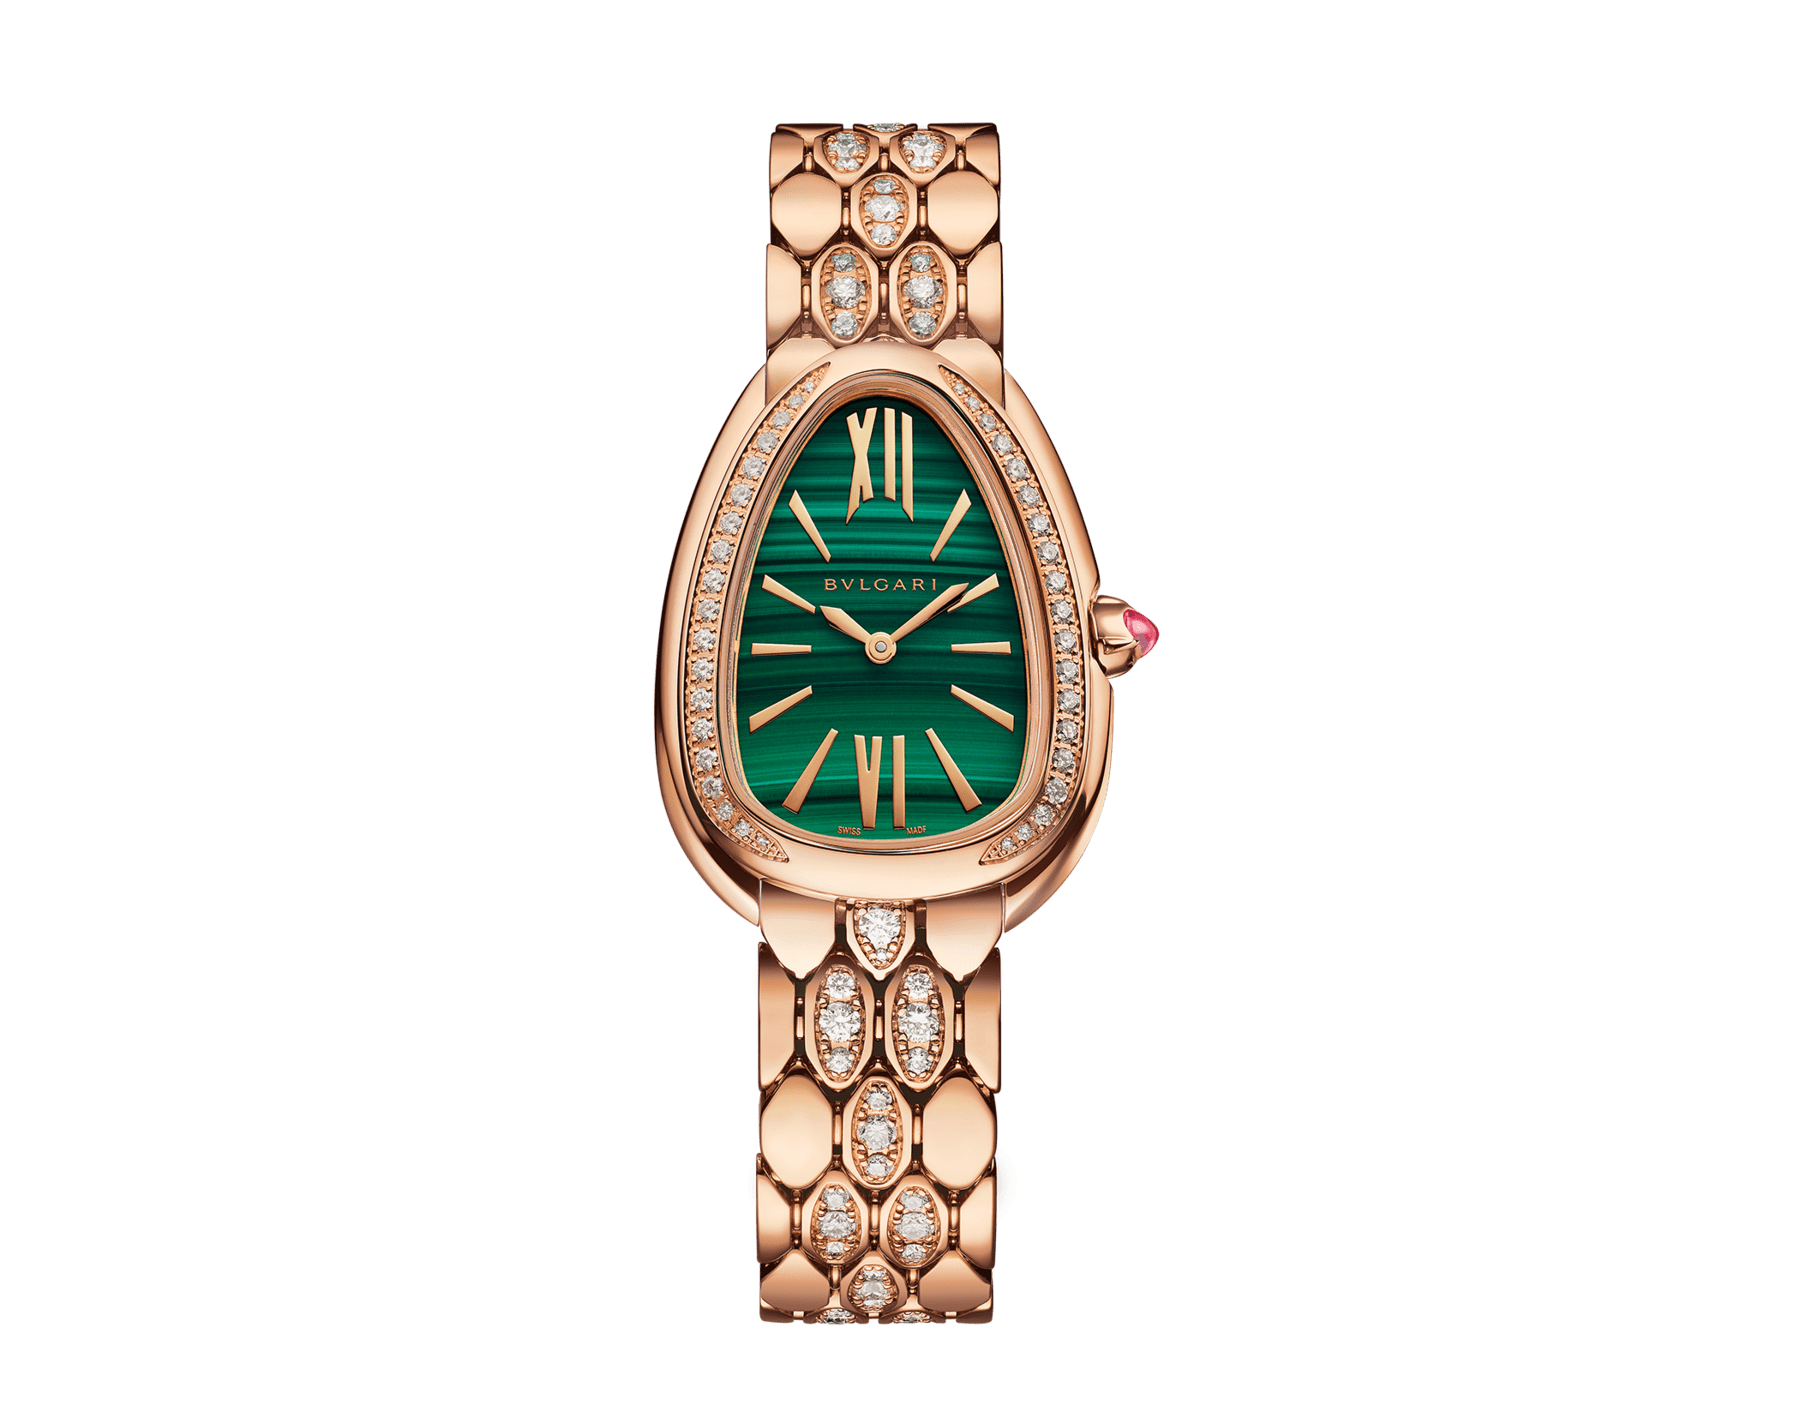 Serpenti Seduttori watch in 18 kt rose gold with brilliant-cut diamonds and malachite dial. Water-resistant up to 30 metres 103835 image 1